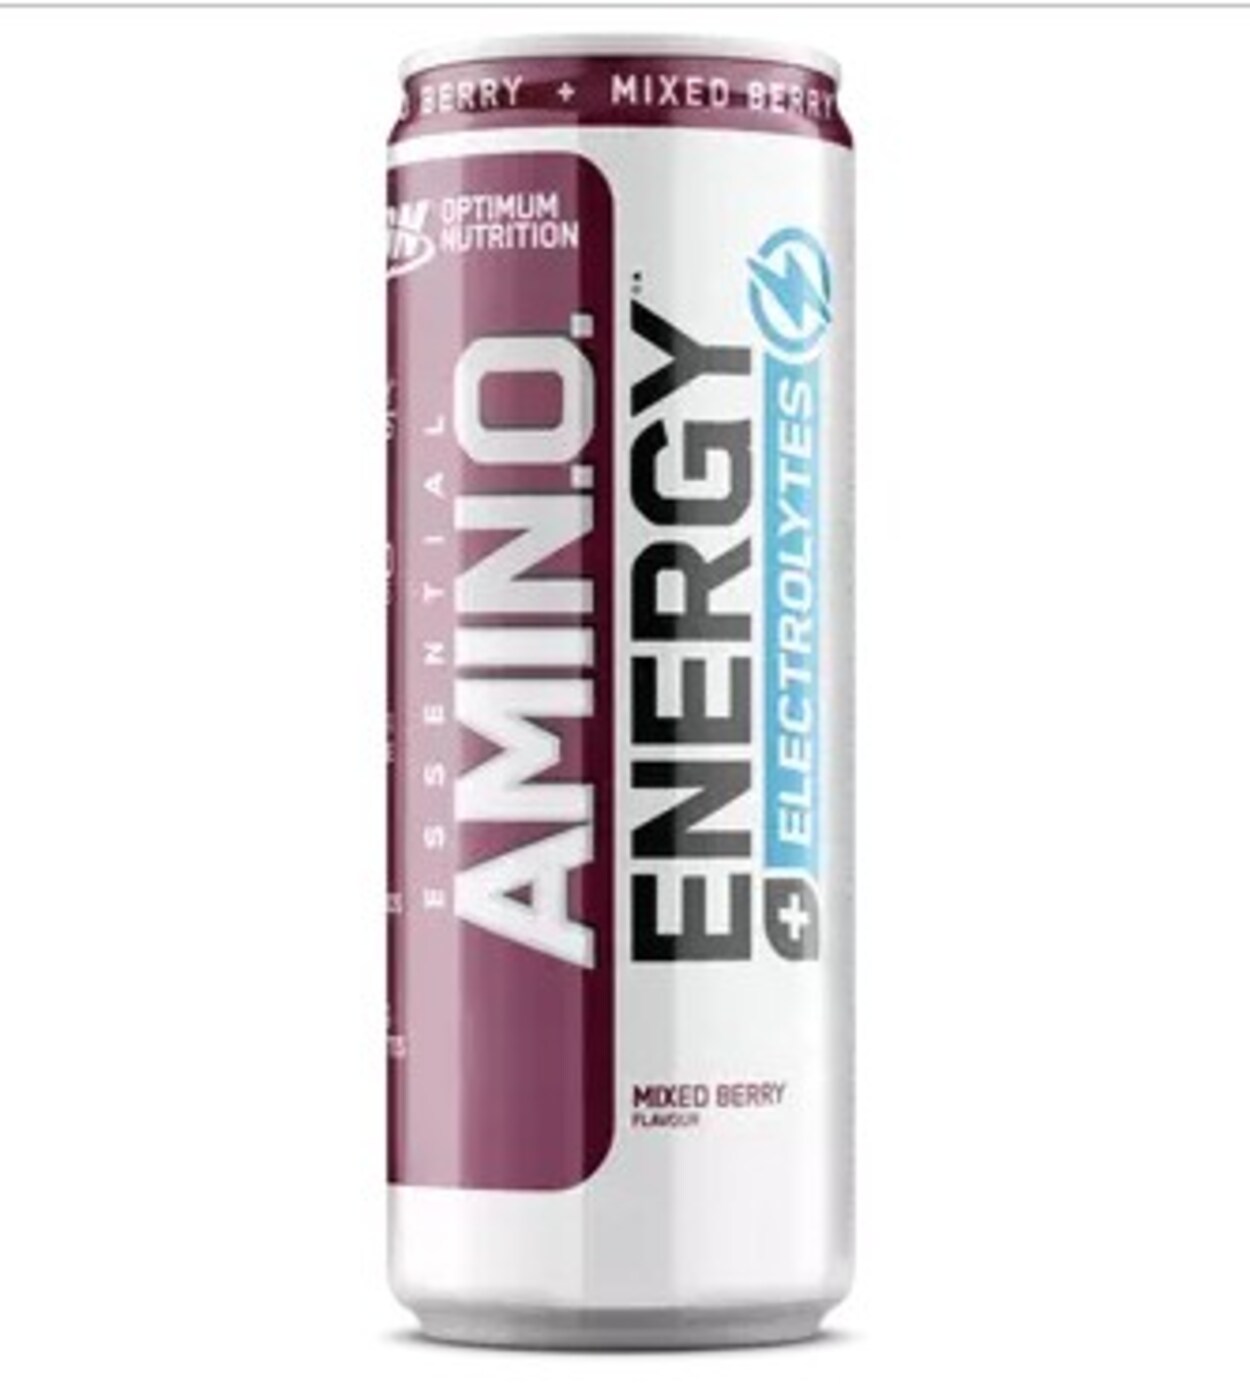 Is Amino Energy Drink Bad For You? (The Real Deal)